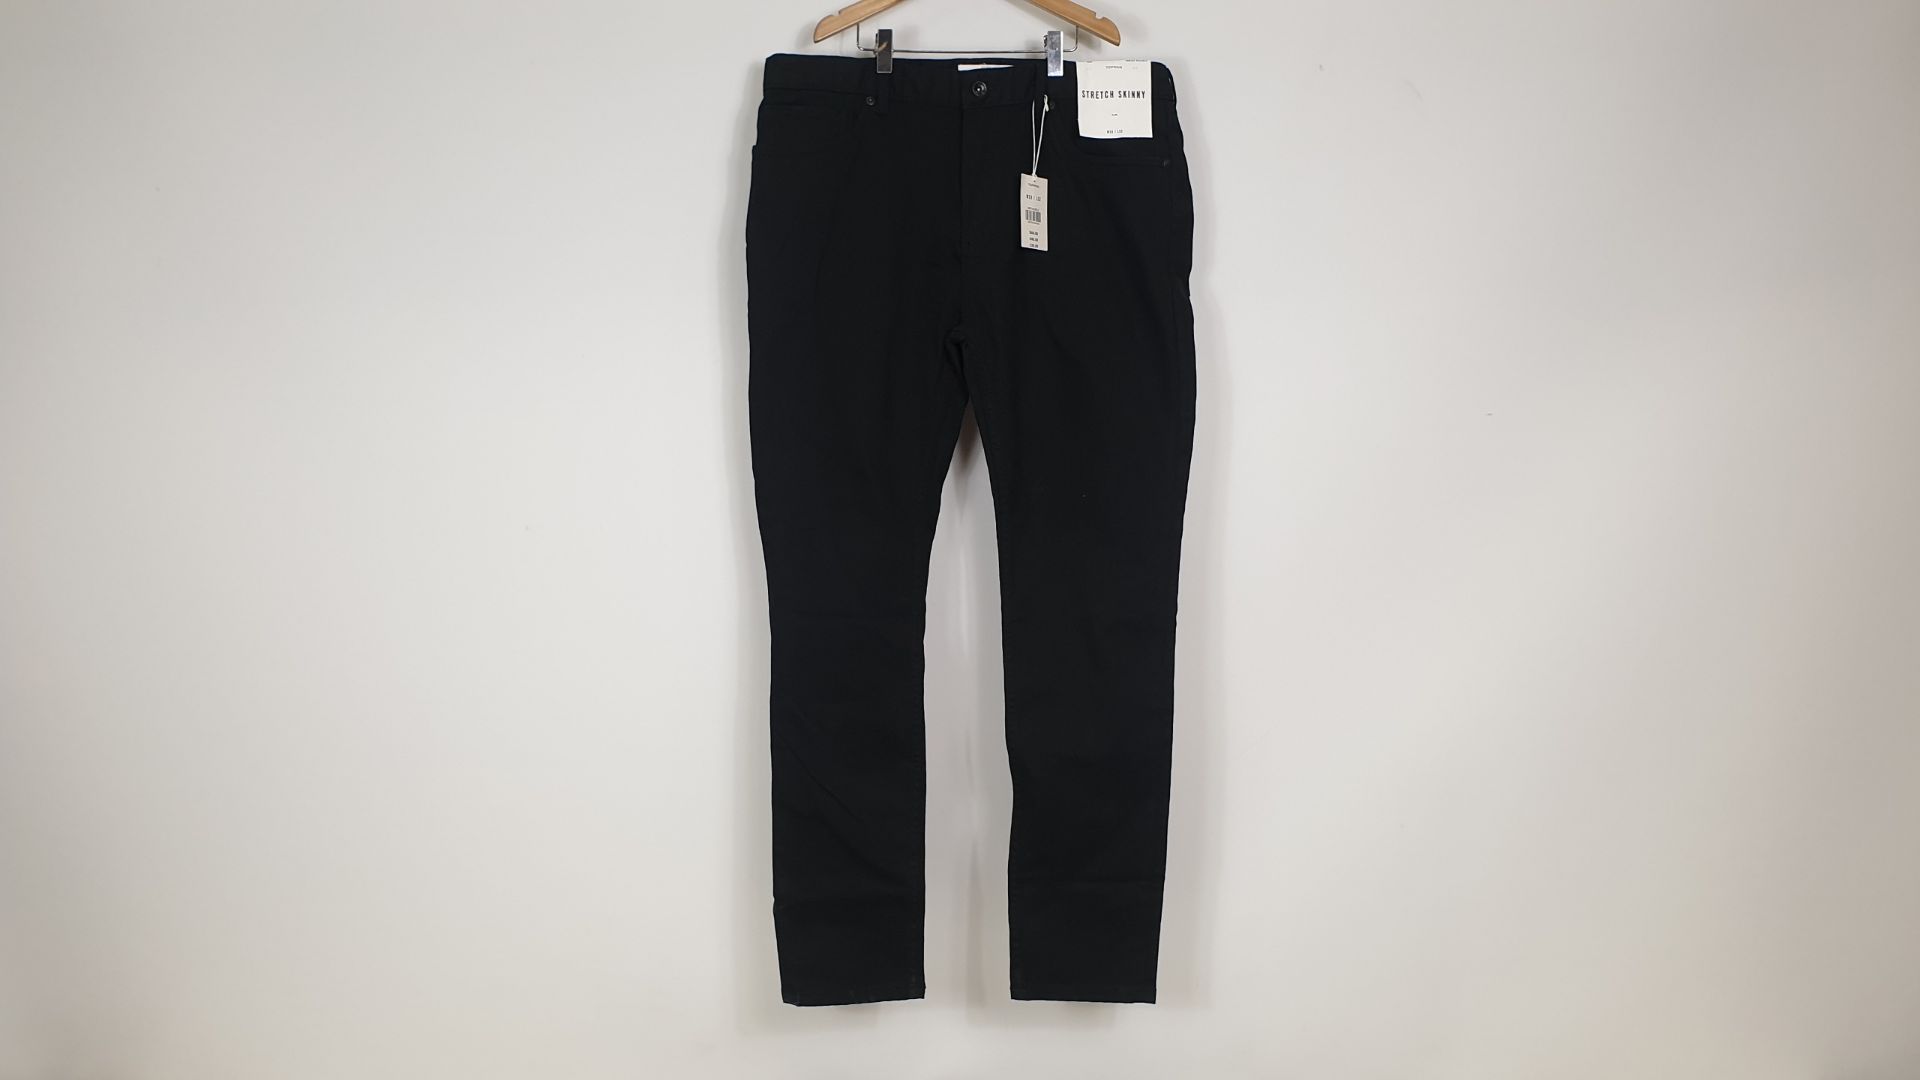 20 X BRAND NEW TOPMAN STRETCH SKINNY BLACK JEANS (RN 125149) - IN VARIOUS SIZES RRP - £30.00pp